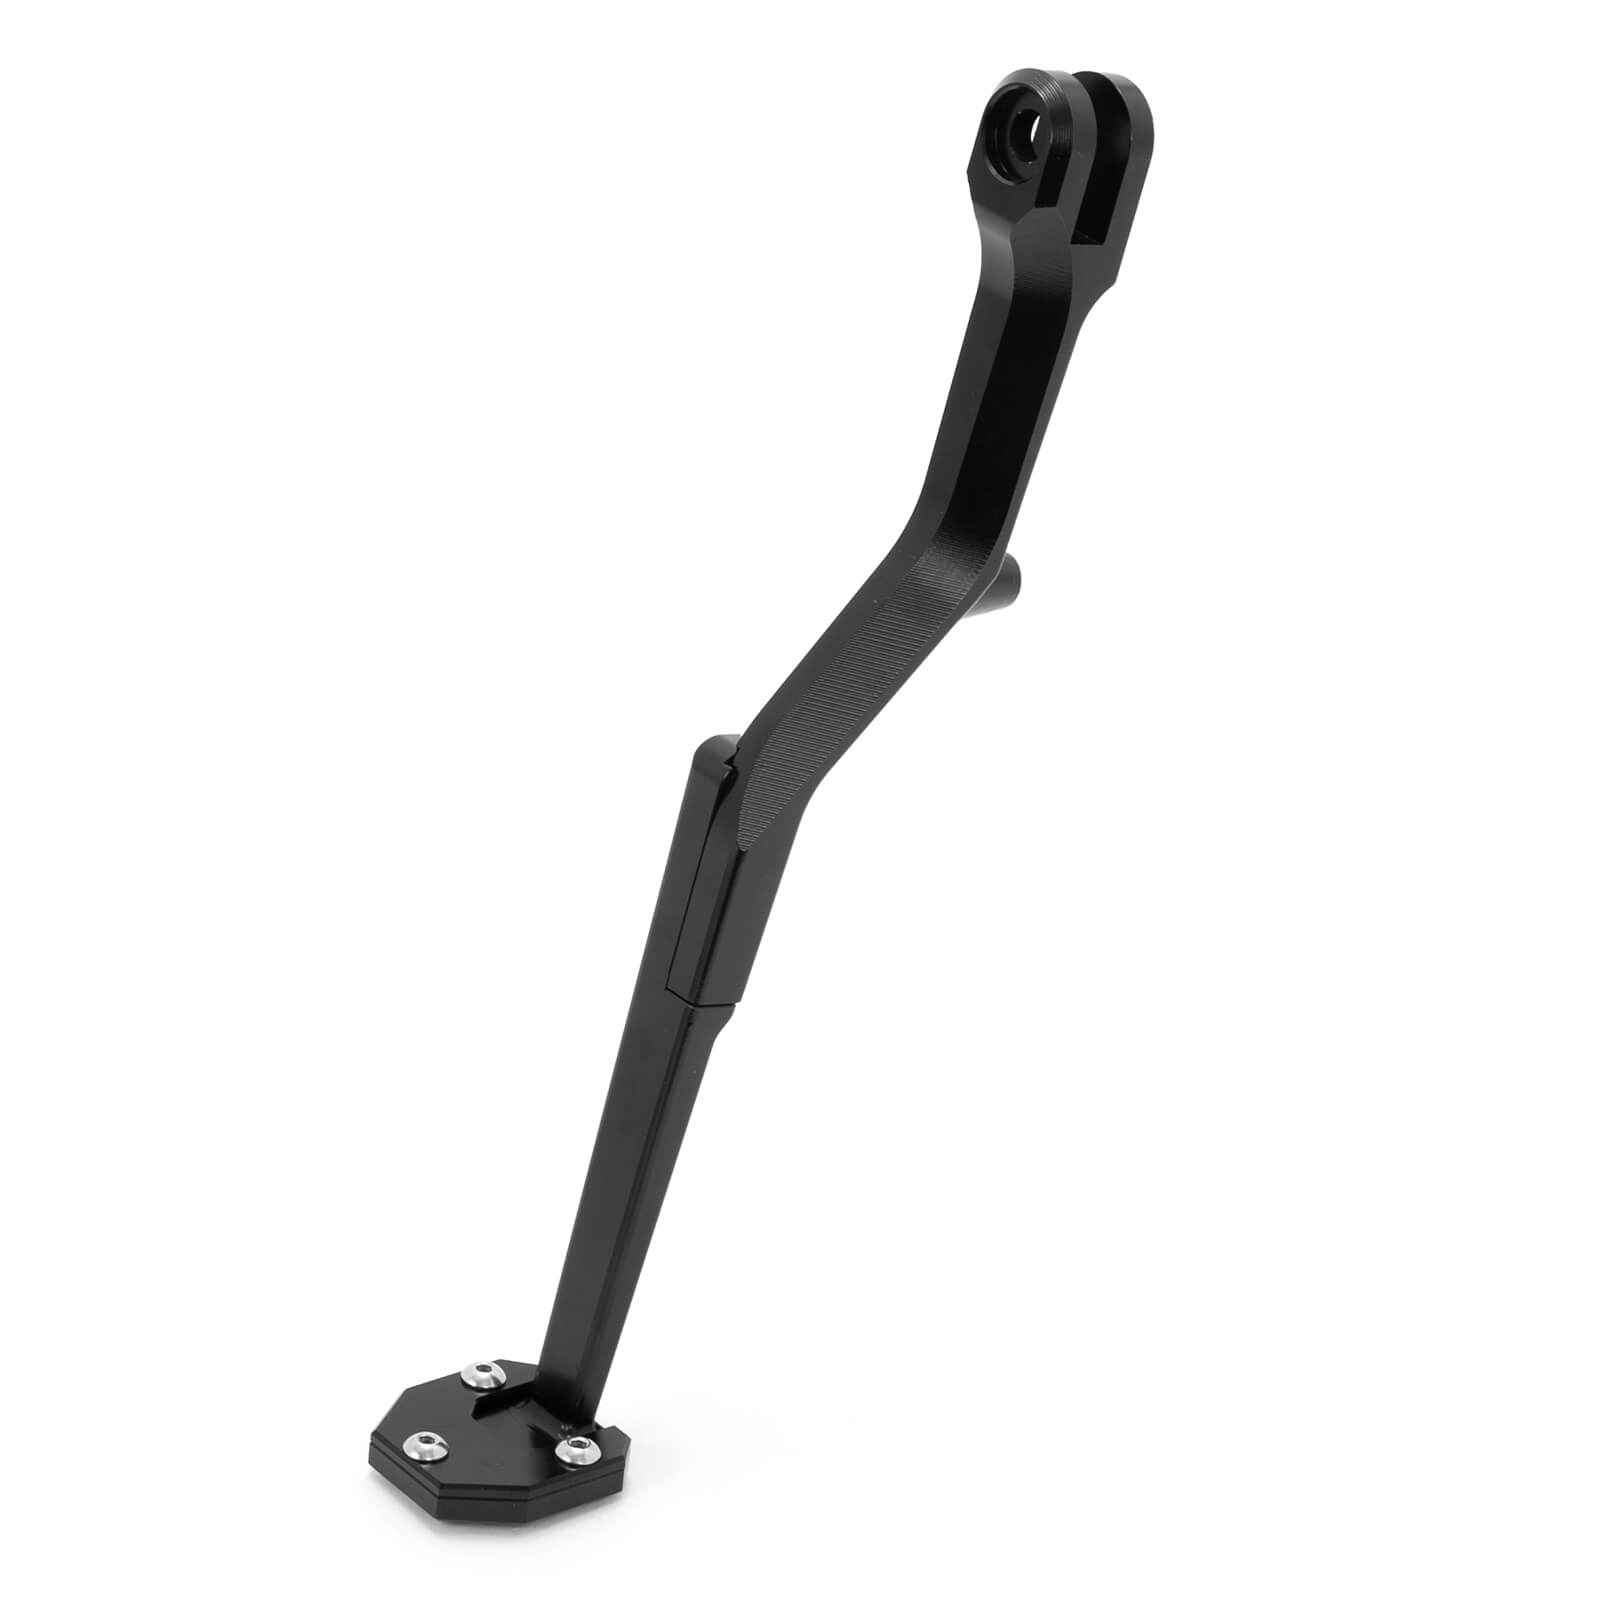 Dirt eBike Adjustable Kickstand Side Stand for Talaria Sting Sur Ron Light Bee Segway X160 & X260 